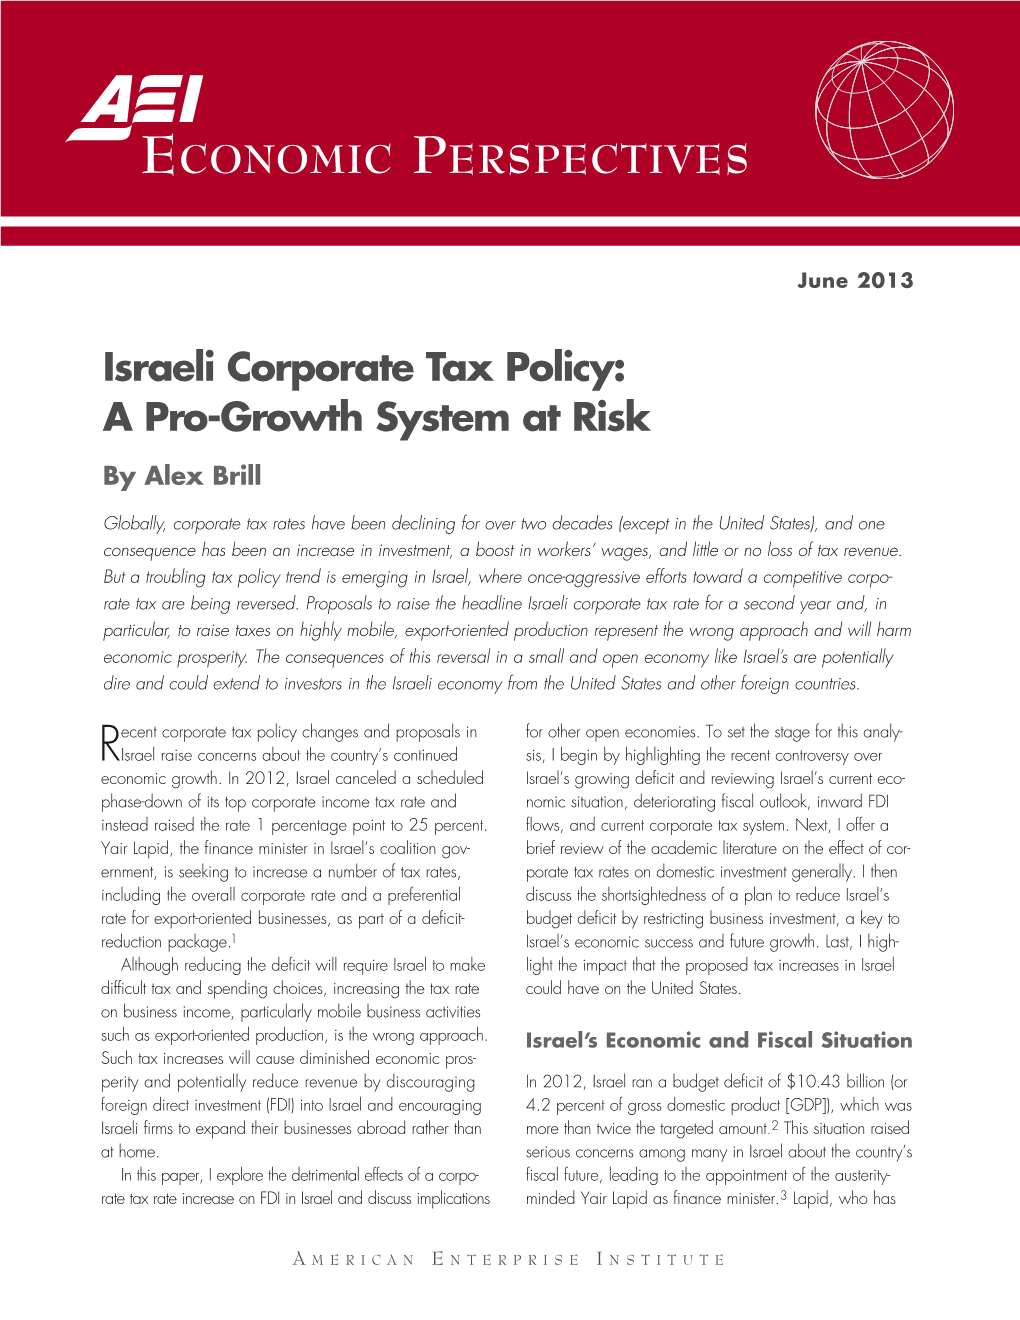 Israeli Corporate Tax Policy: a Pro-Growth System at Risk